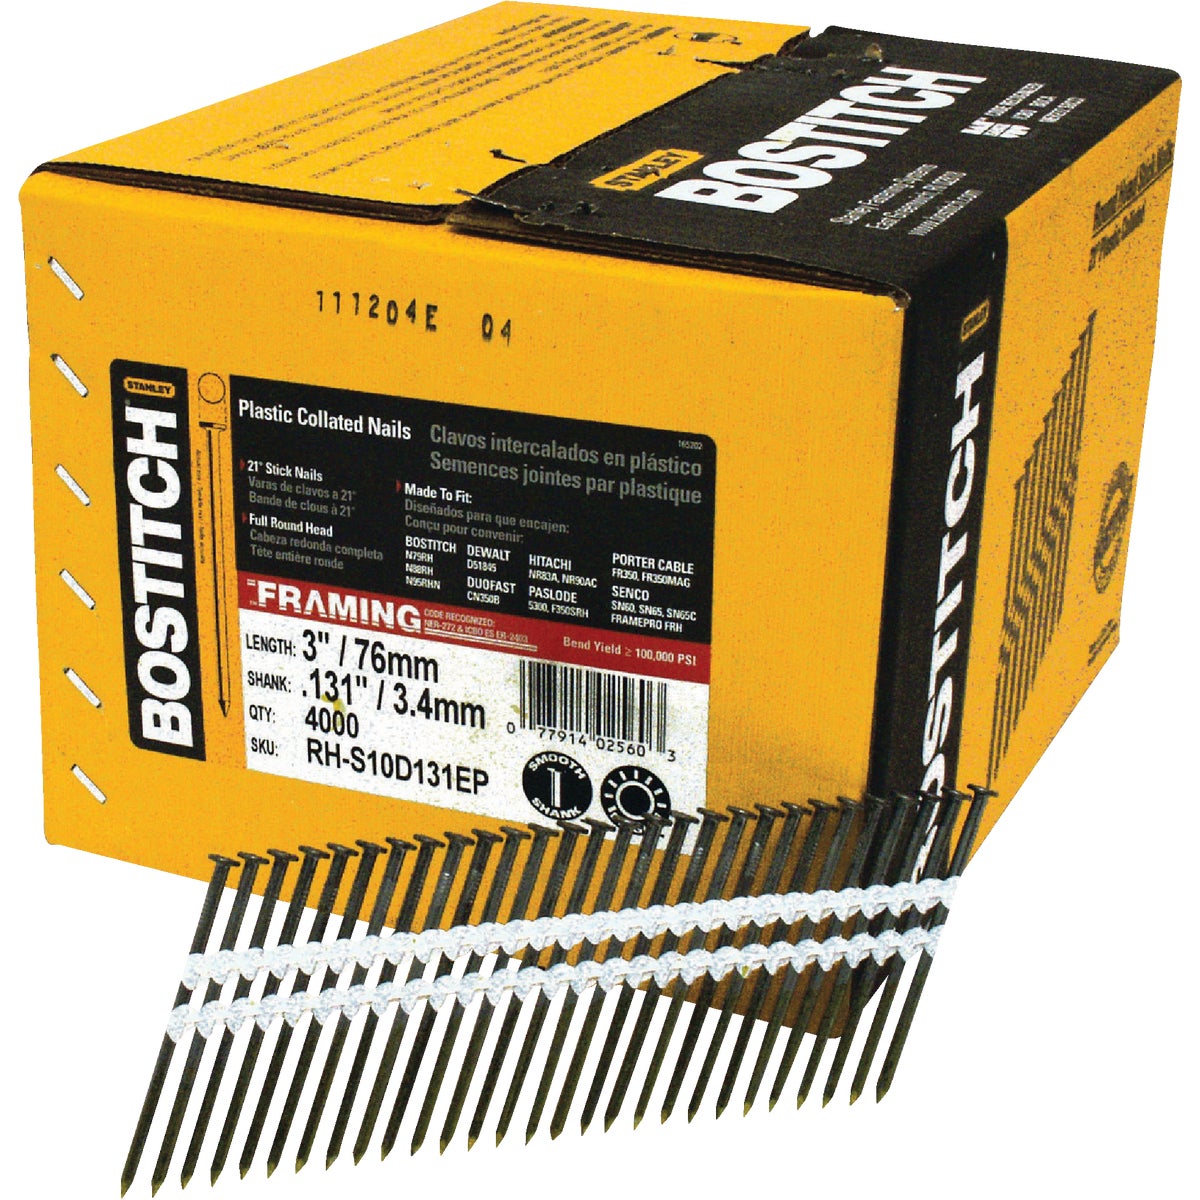 Bostitch 21 Degree Plastic Strip Coated Full Round Head Framing Stick Nails, 3 In. x .131 In. (4000 Ct.)